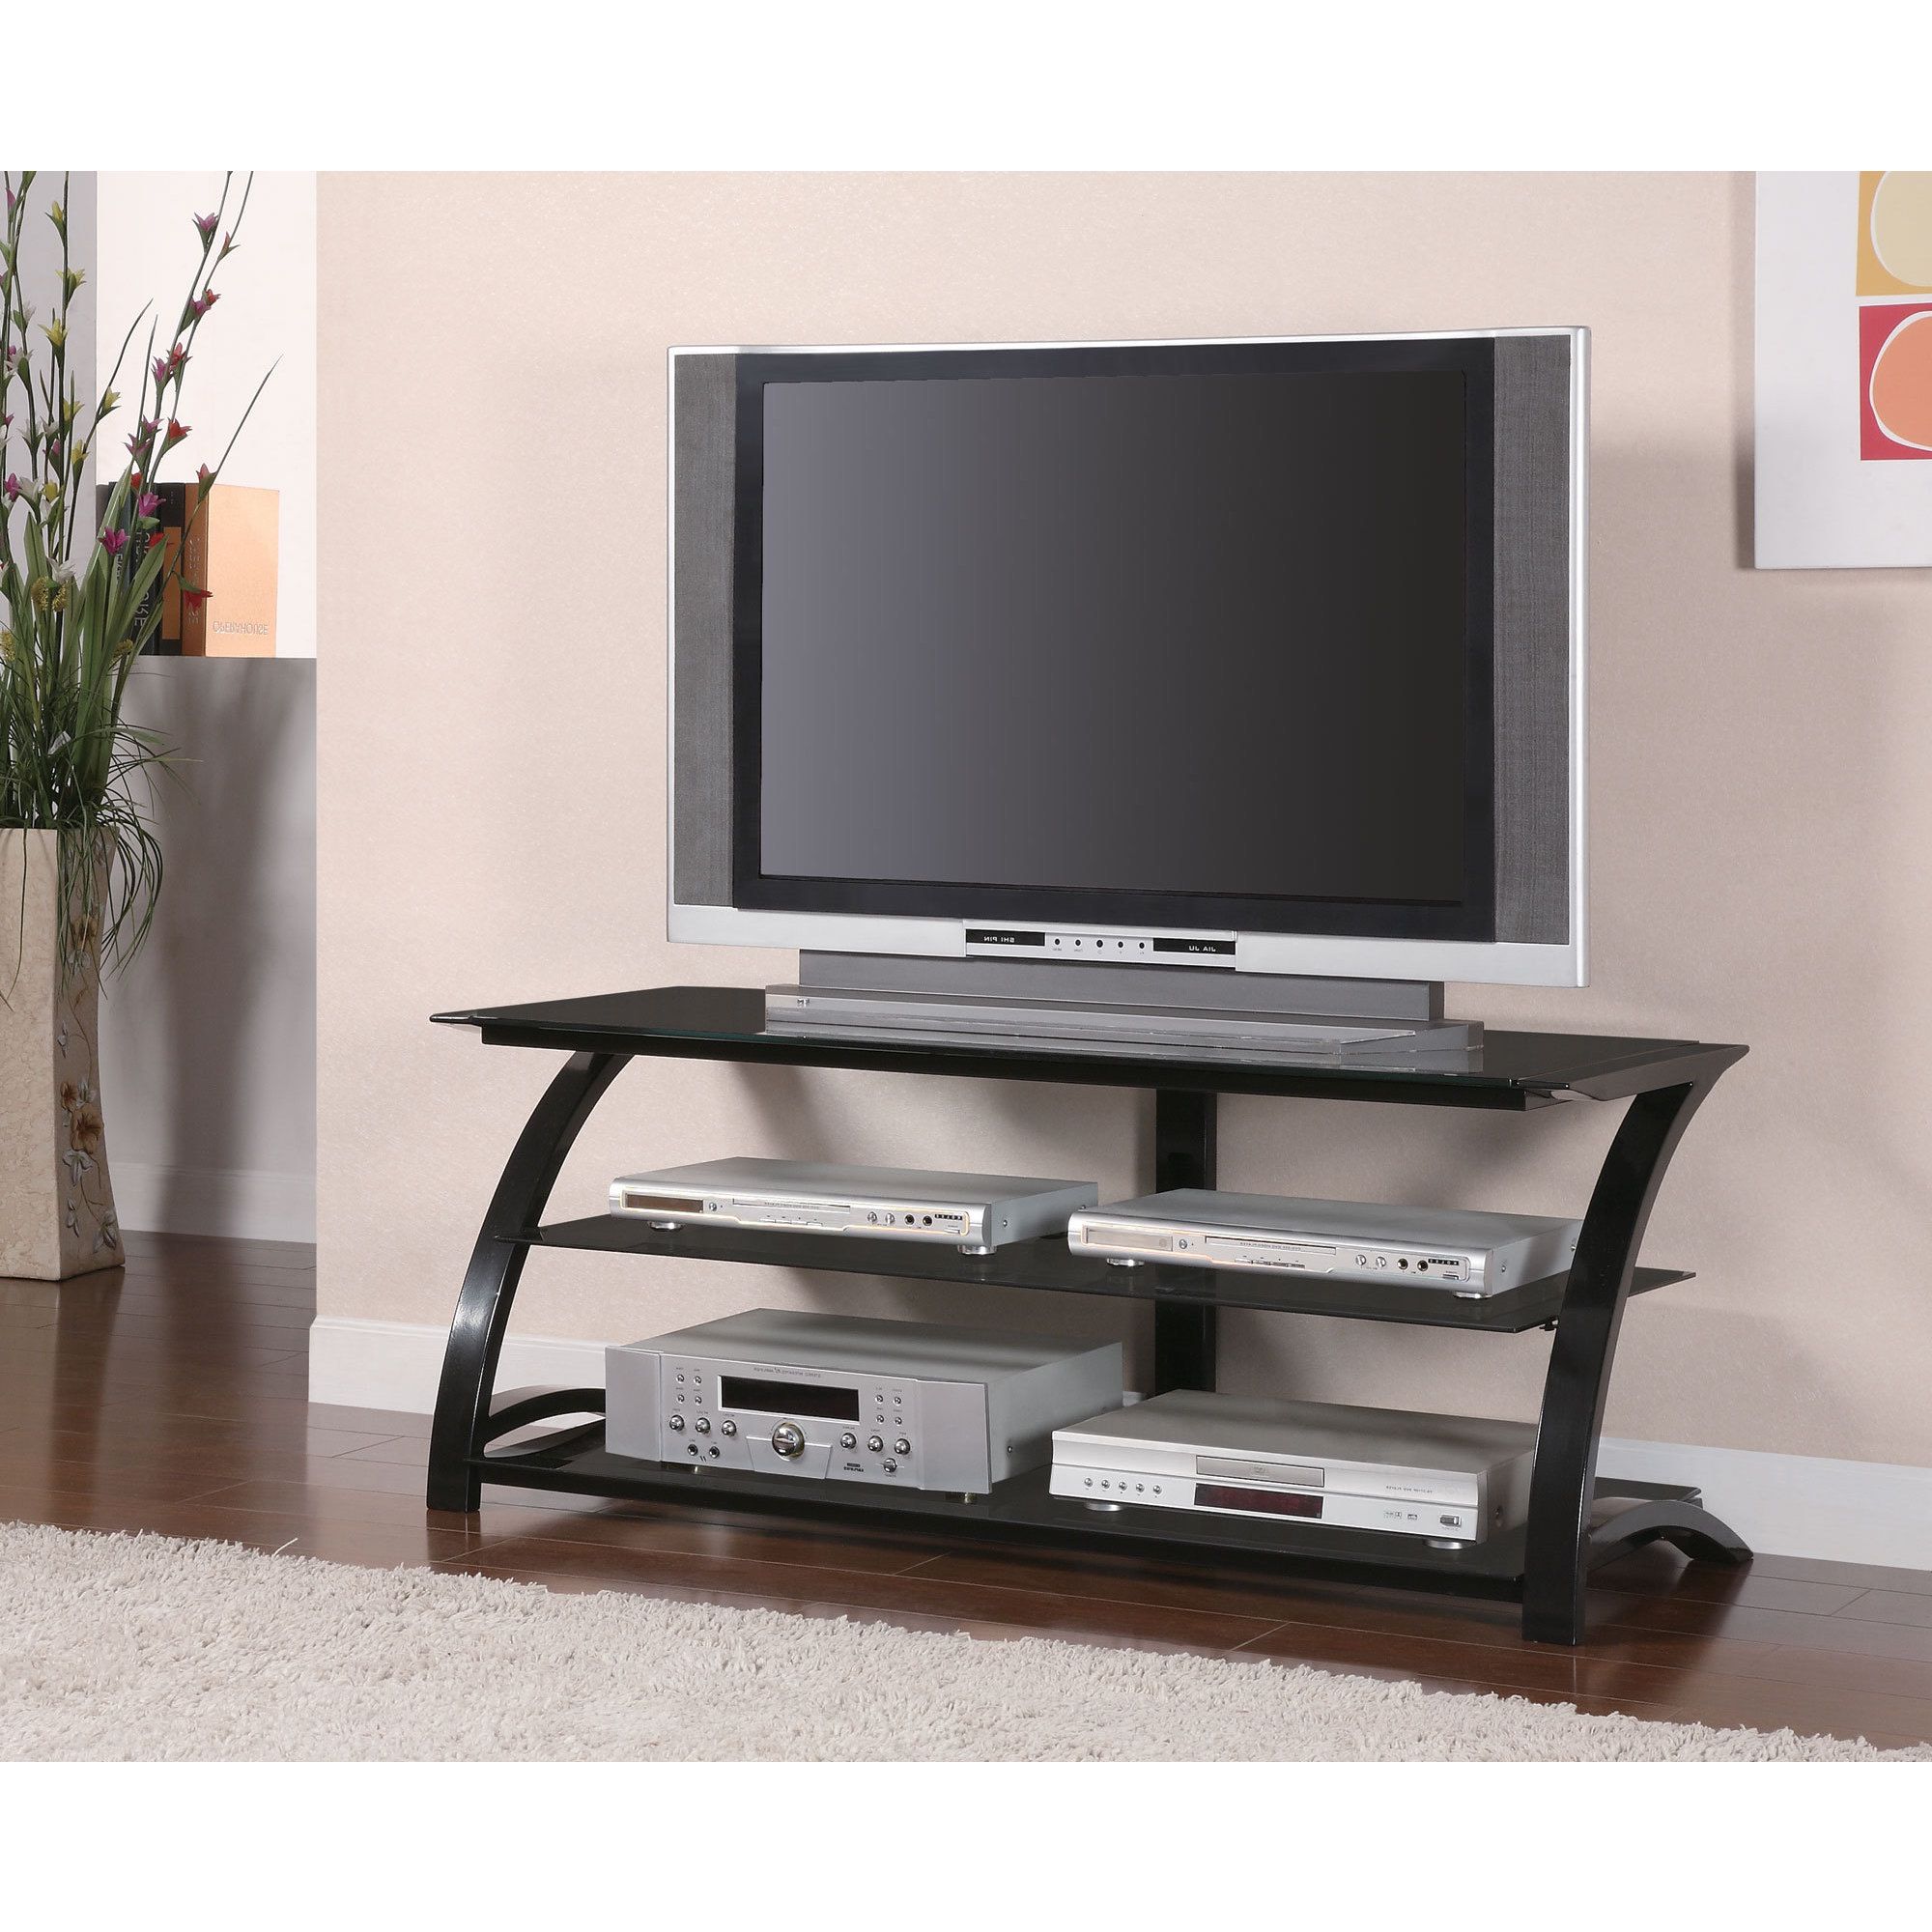 Glass Shelves Tv Stands Regarding Popular Coaster Company Black Metal Tempered Glass Tv Stand – 48" X Black Small (View 12 of 15)